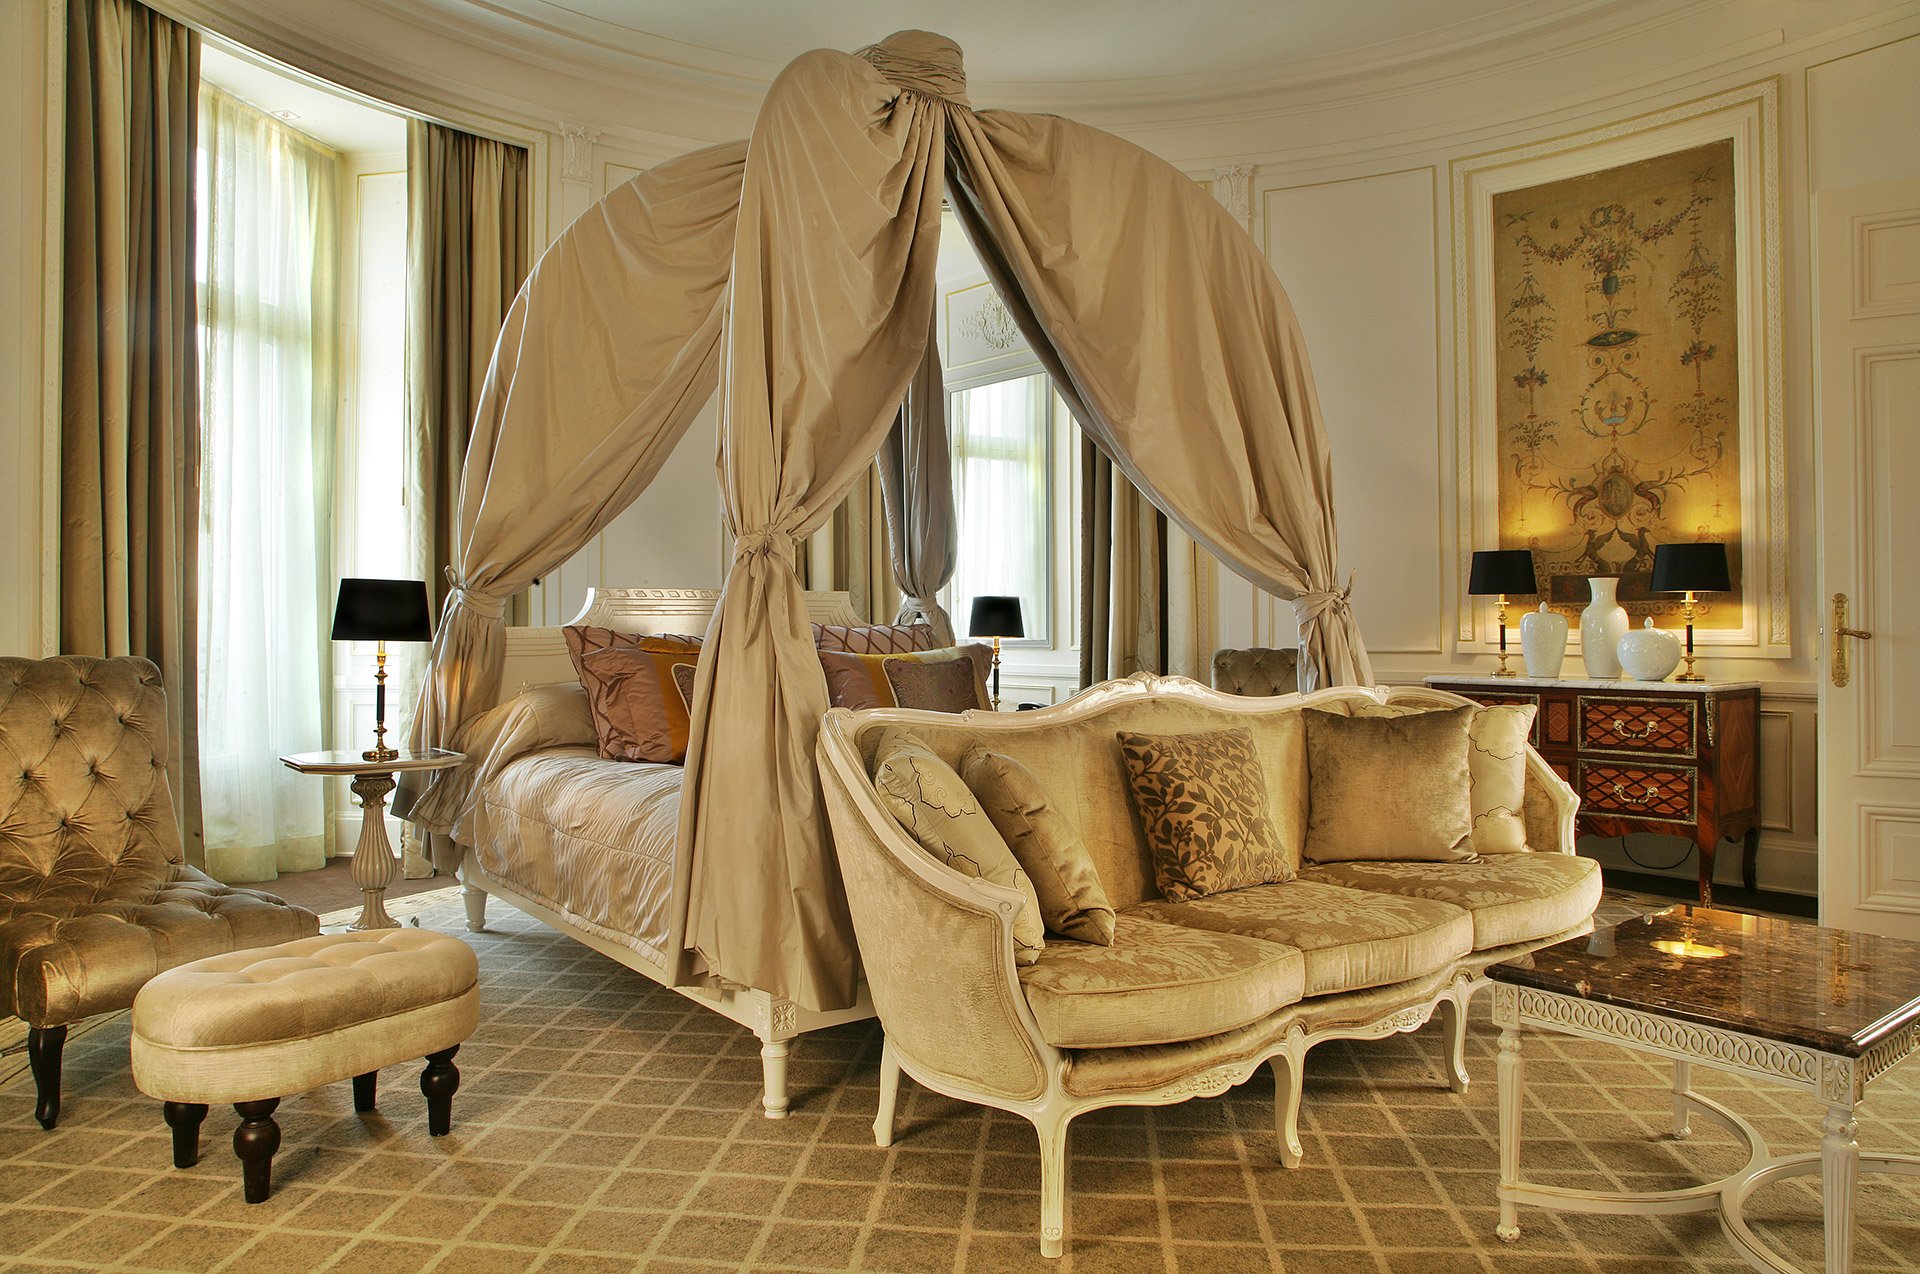 467/import-from-v1/images/Chambres/Suite Royale/146-Chambre.jpg